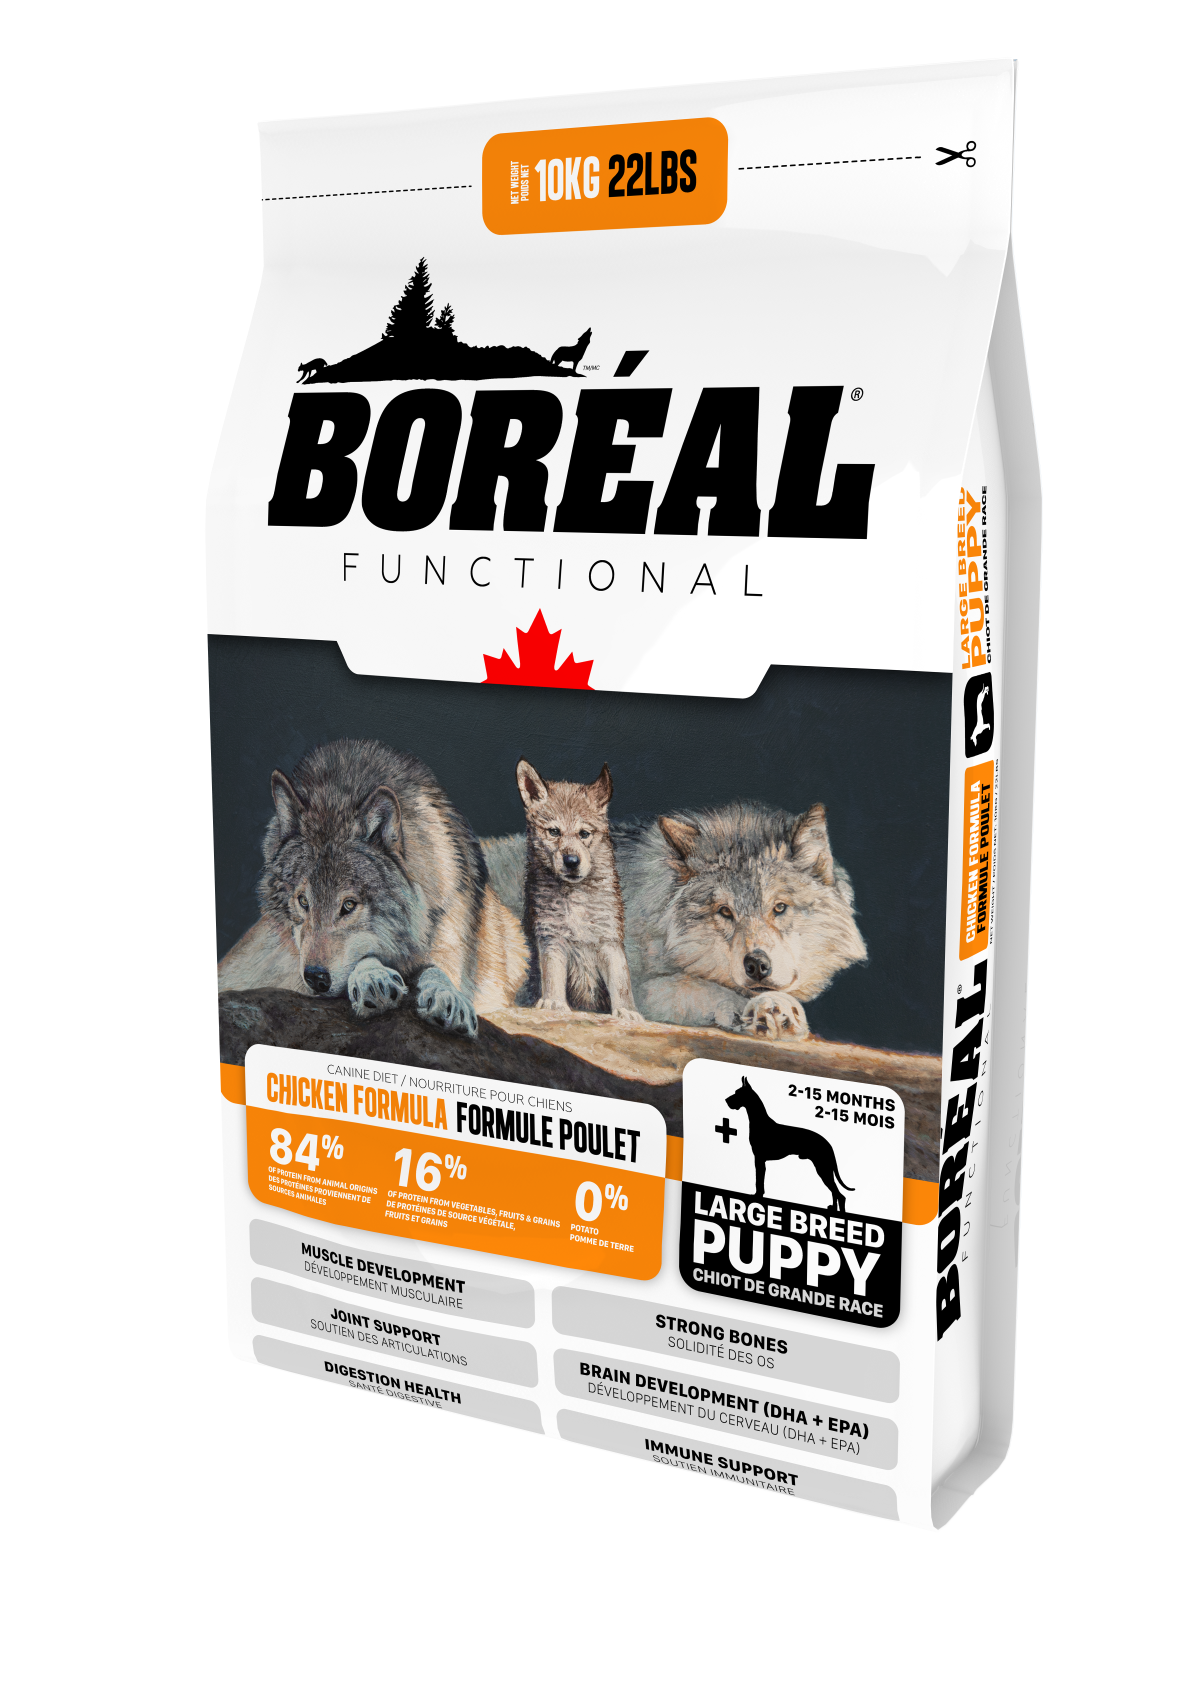 BORÉAL FUNCTIONAL LARGE BREED PUPPY DOG FOOD